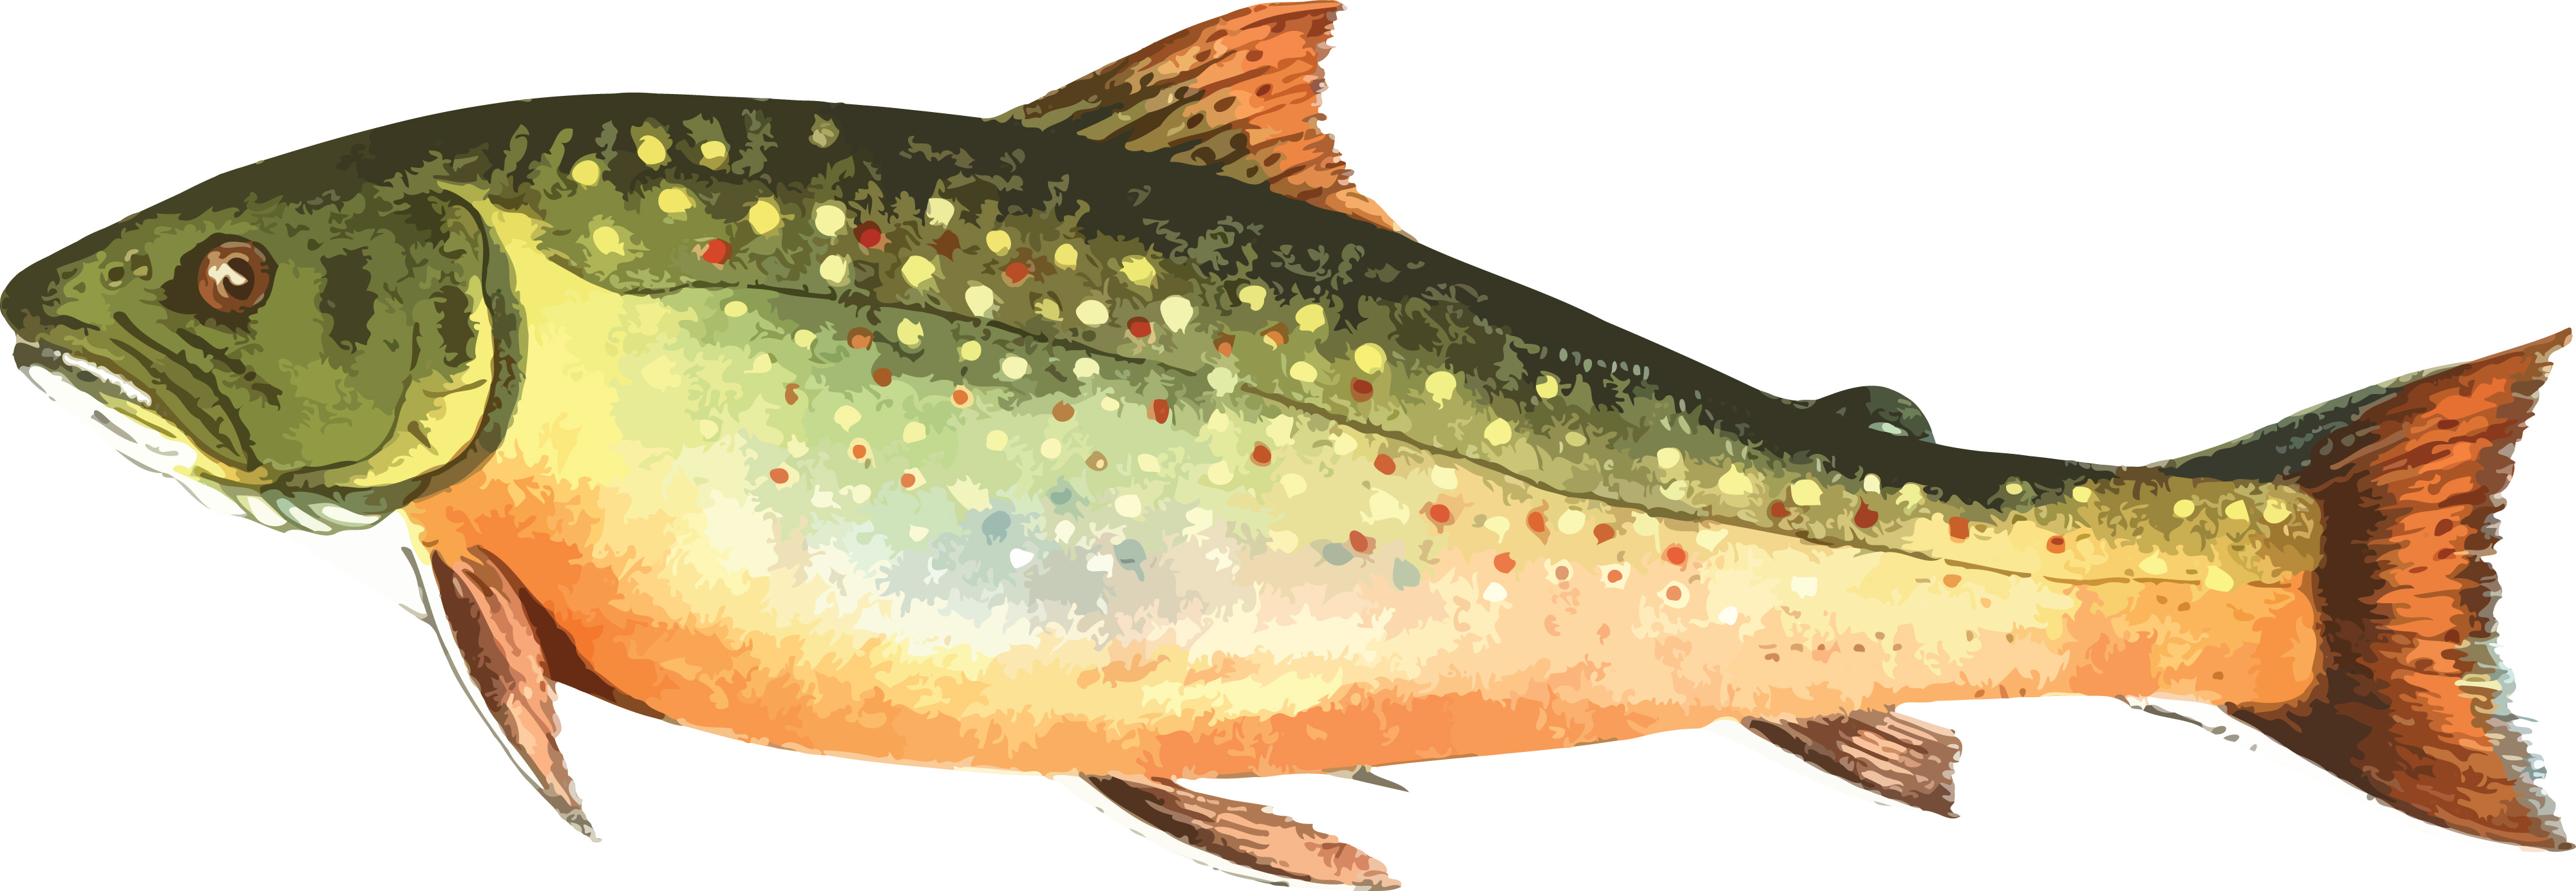 324 Trout free clipart.